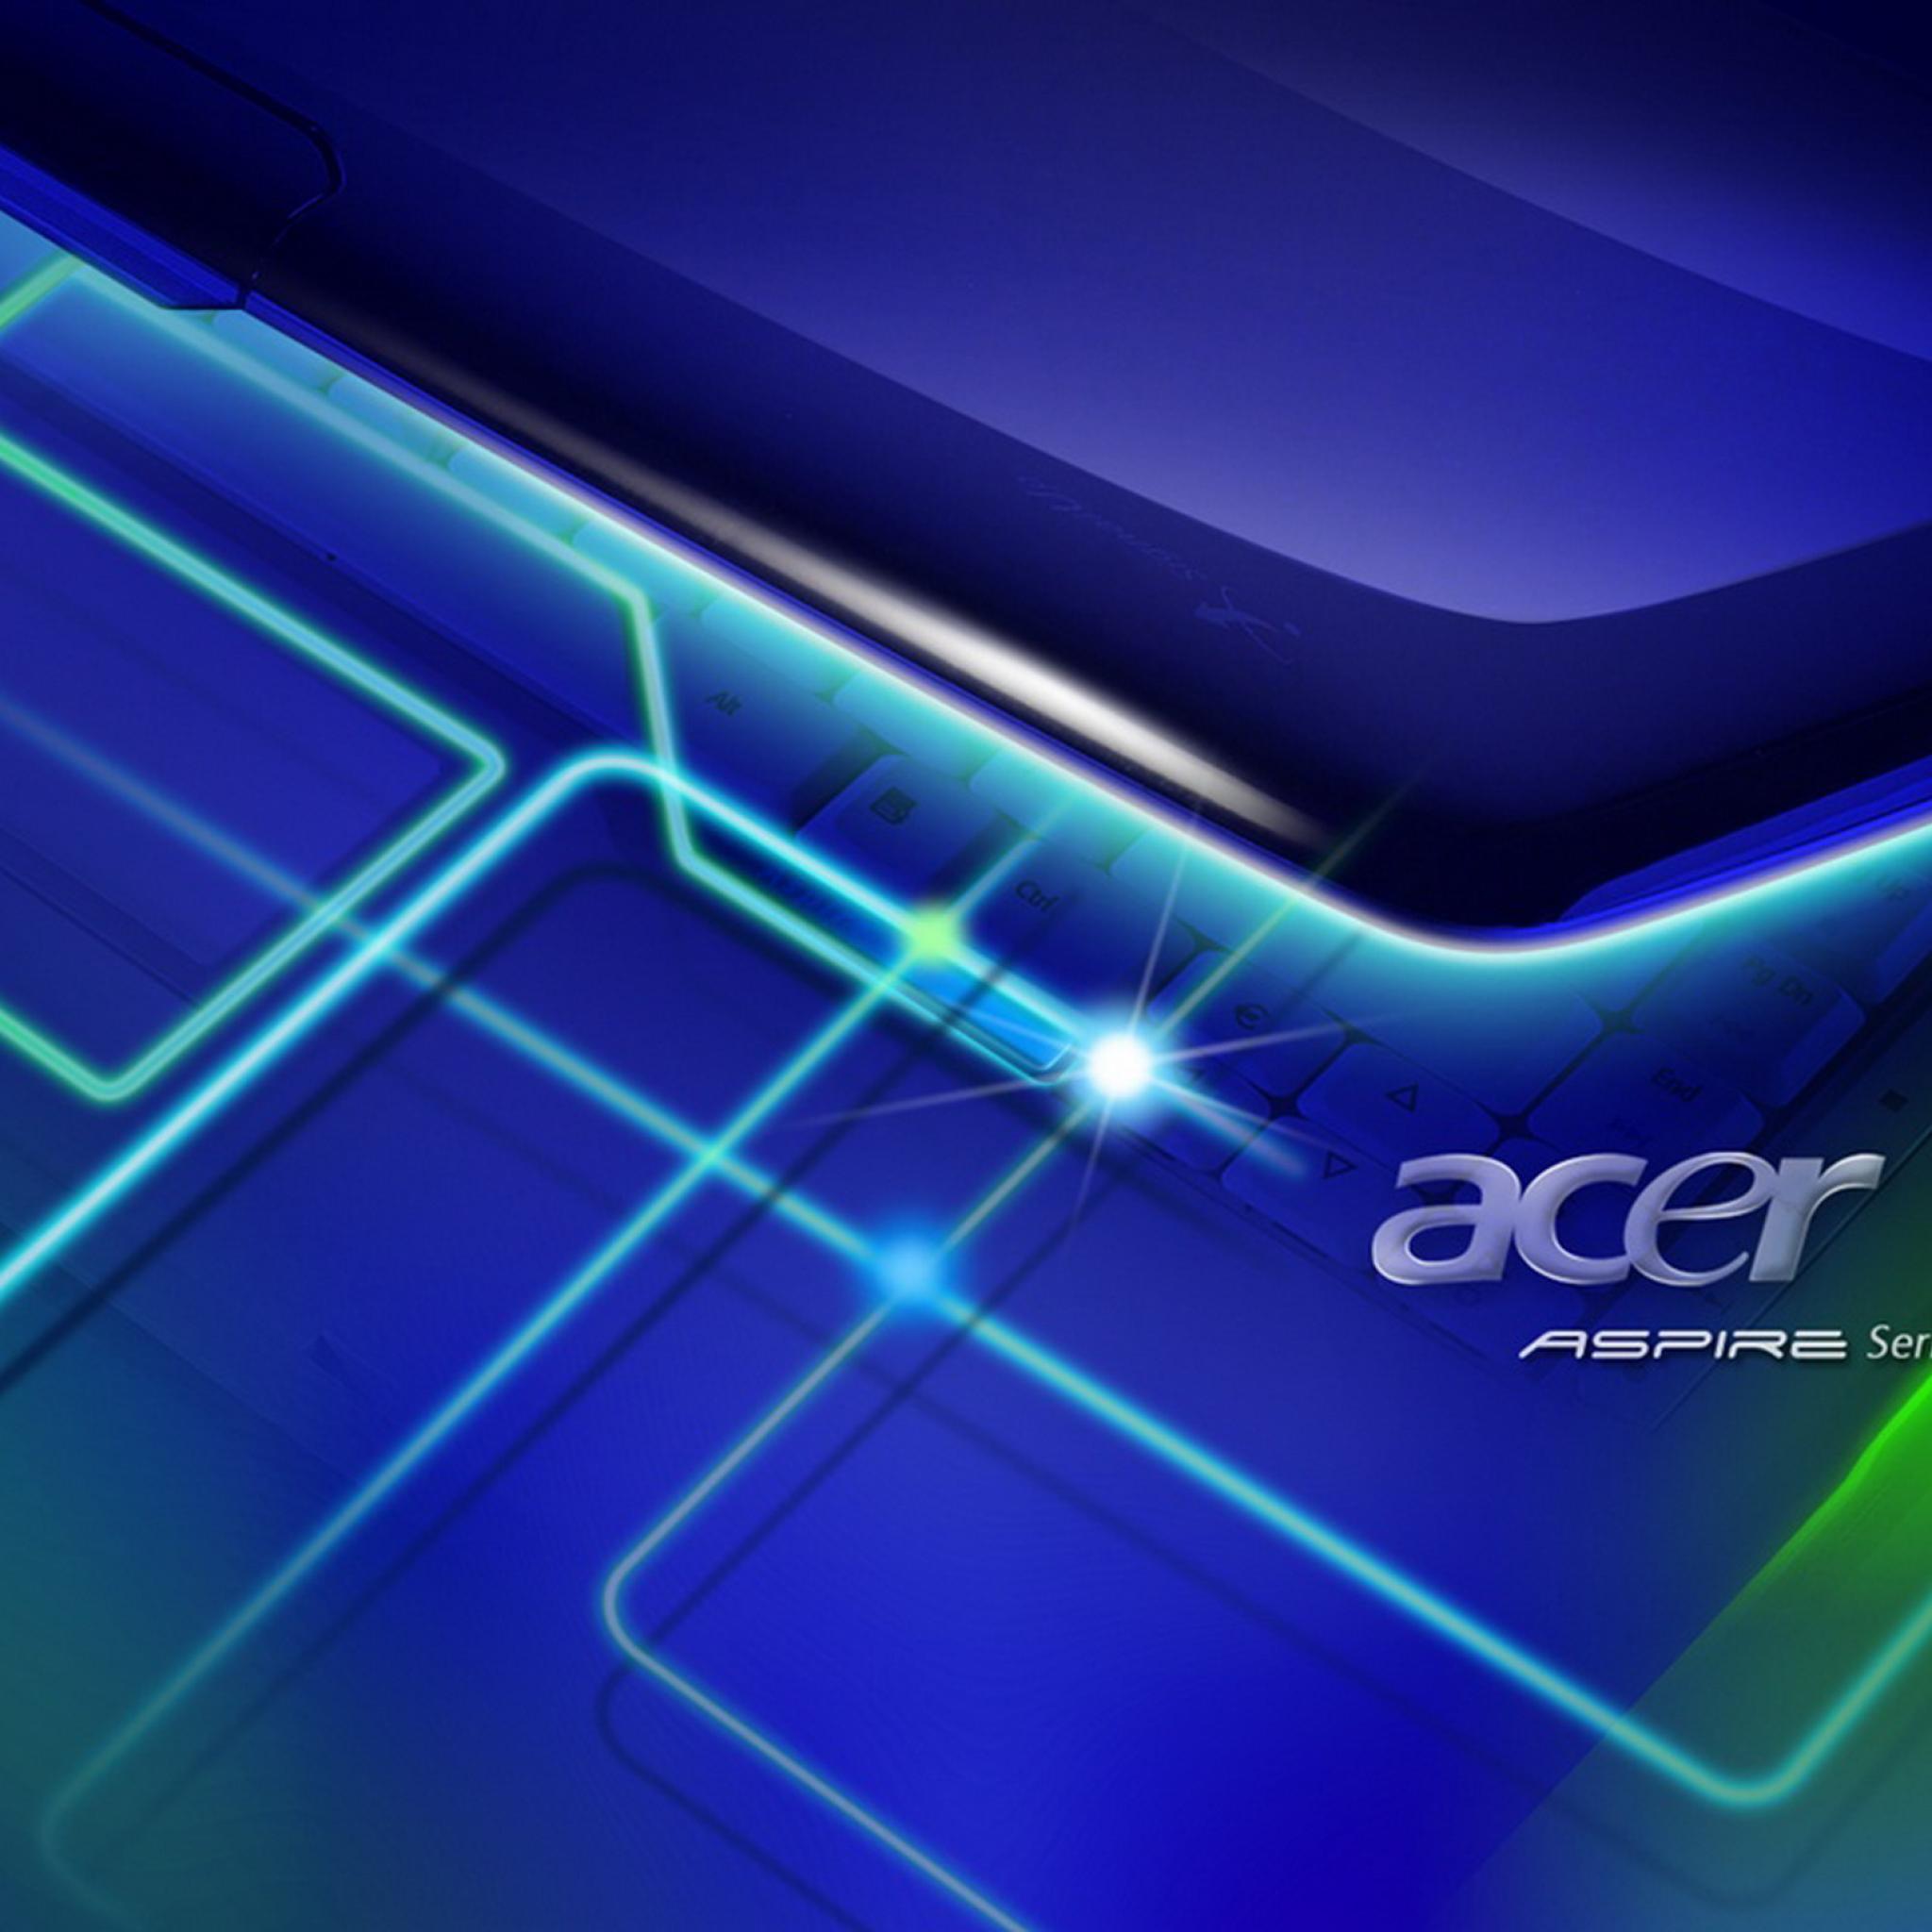 Acer Wallpaper Pictur 48x48 0k Jpeg Www Wallpaperssho Image At 48 Times 48 Resolution In Hd Wallpapers 256 Ipad タブレット壁紙ギャラリー